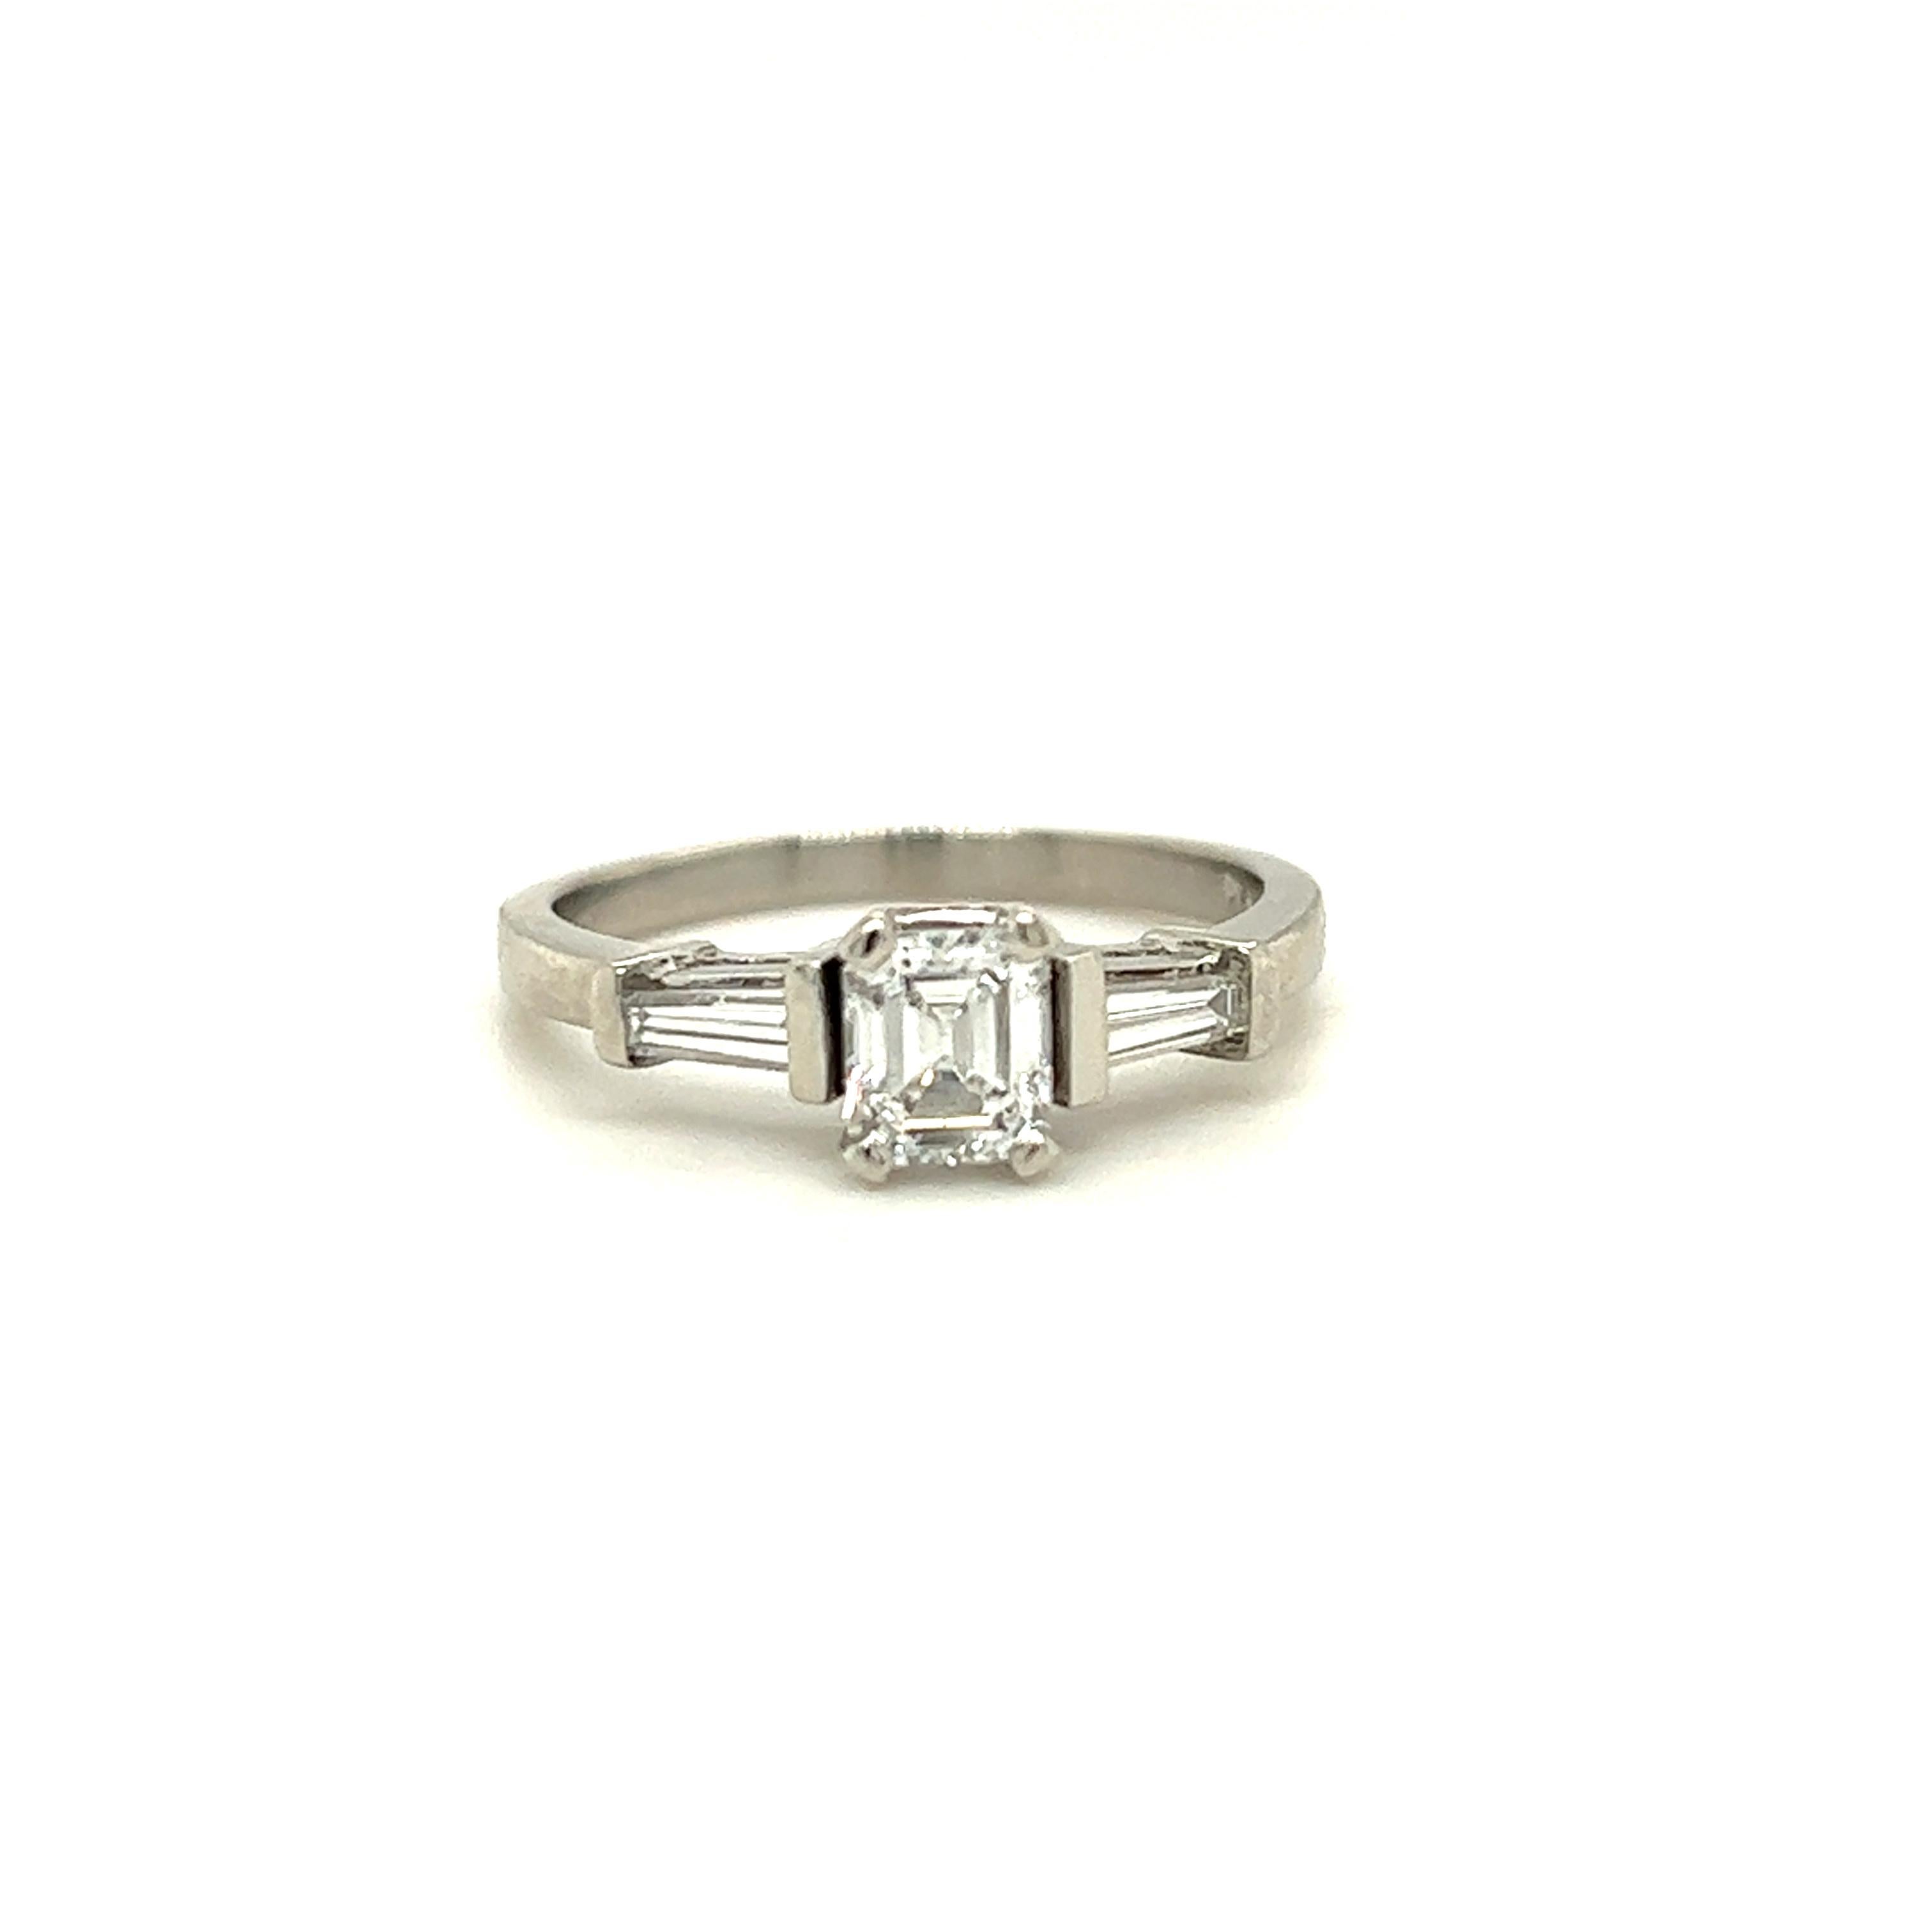 Emerald Cut GIA Diamond Platinum Engagement Ring In Good Condition For Sale In Towson, MD